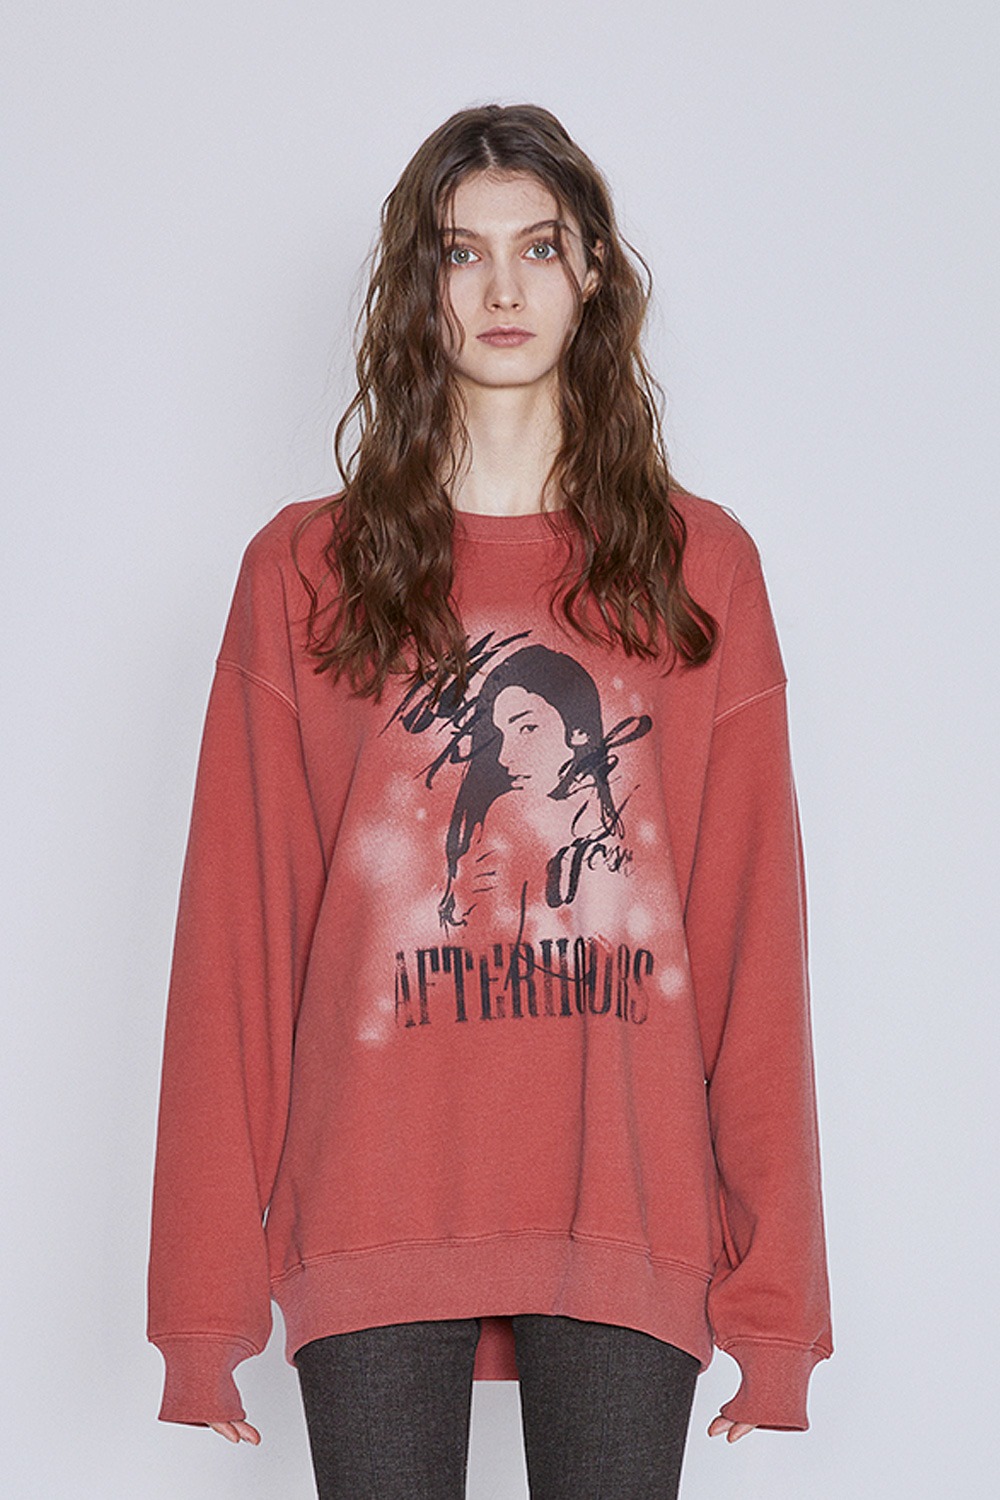 WITH YOUR AFTERHOURS SWEATSHIRT (DUSTY RED)